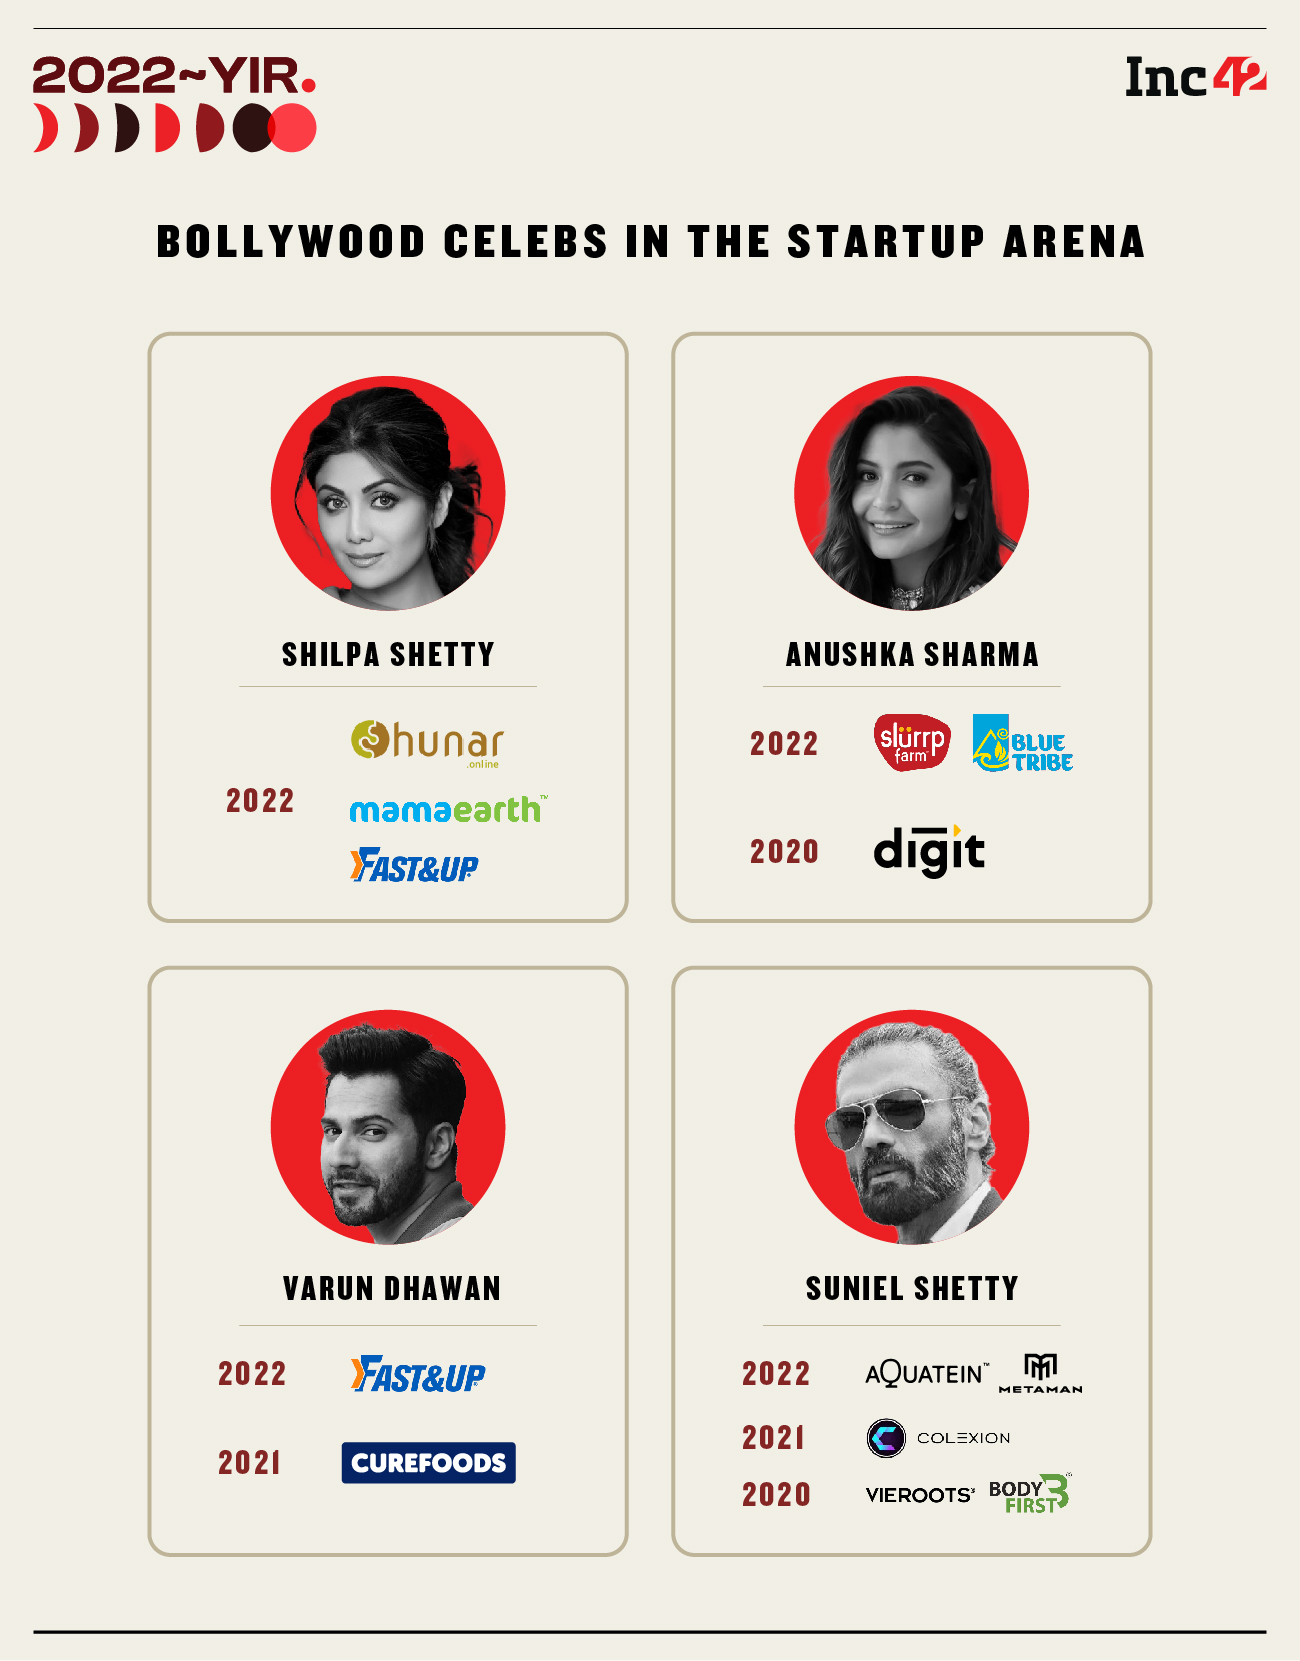 Bollywood celebrities investing in Indian startups